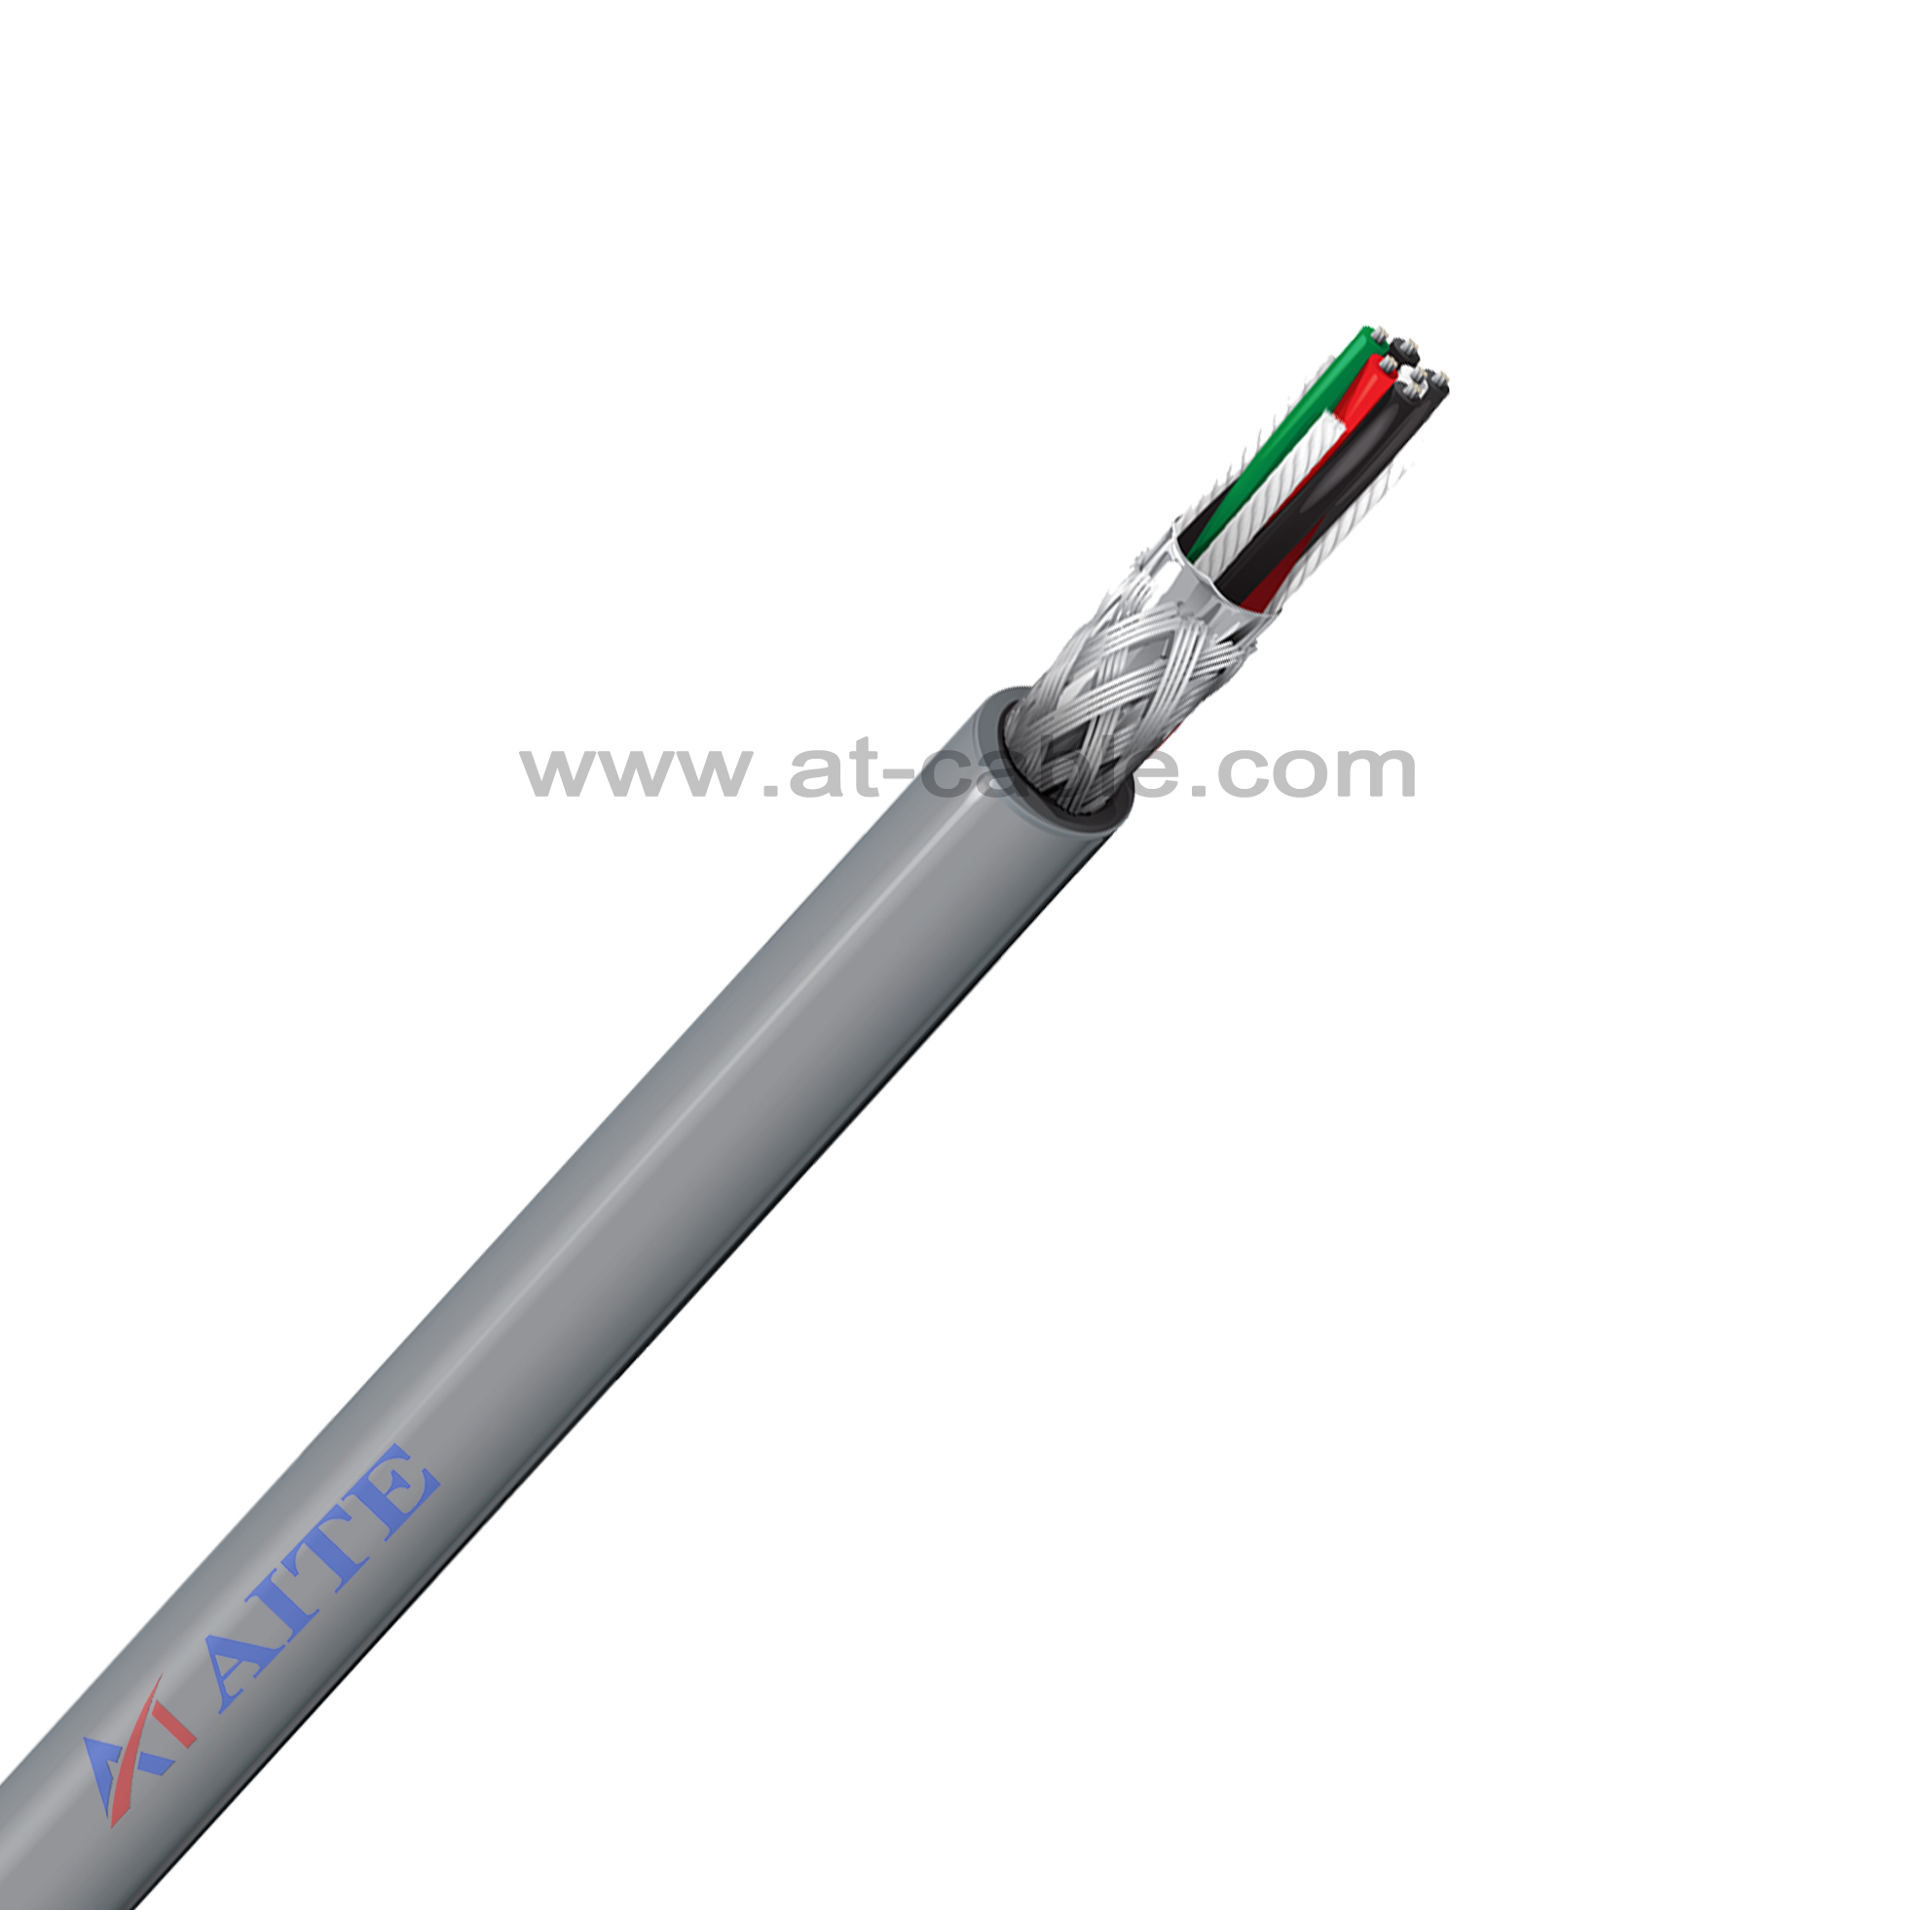 Fieldbus cable- RS 485